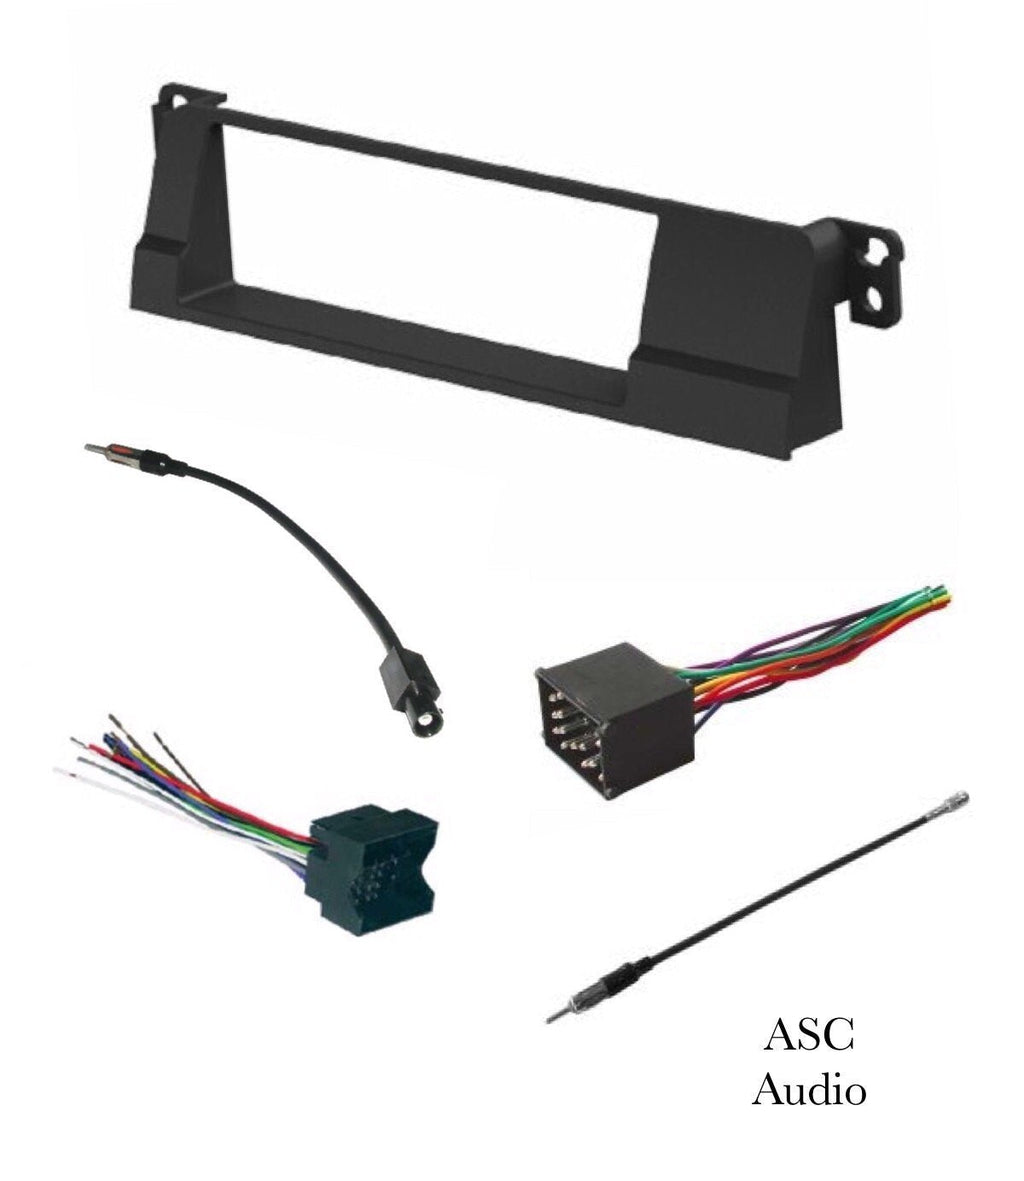 ASC Car Stereo Install Dash Kit, Wire Harness, and Antenna Adapter for installing a Single Din Aftermarket Radio for 1999 2000 2001 2002 2003 2004 2005 BMW E46 318 323 325 328 330 - LeoForward Australia